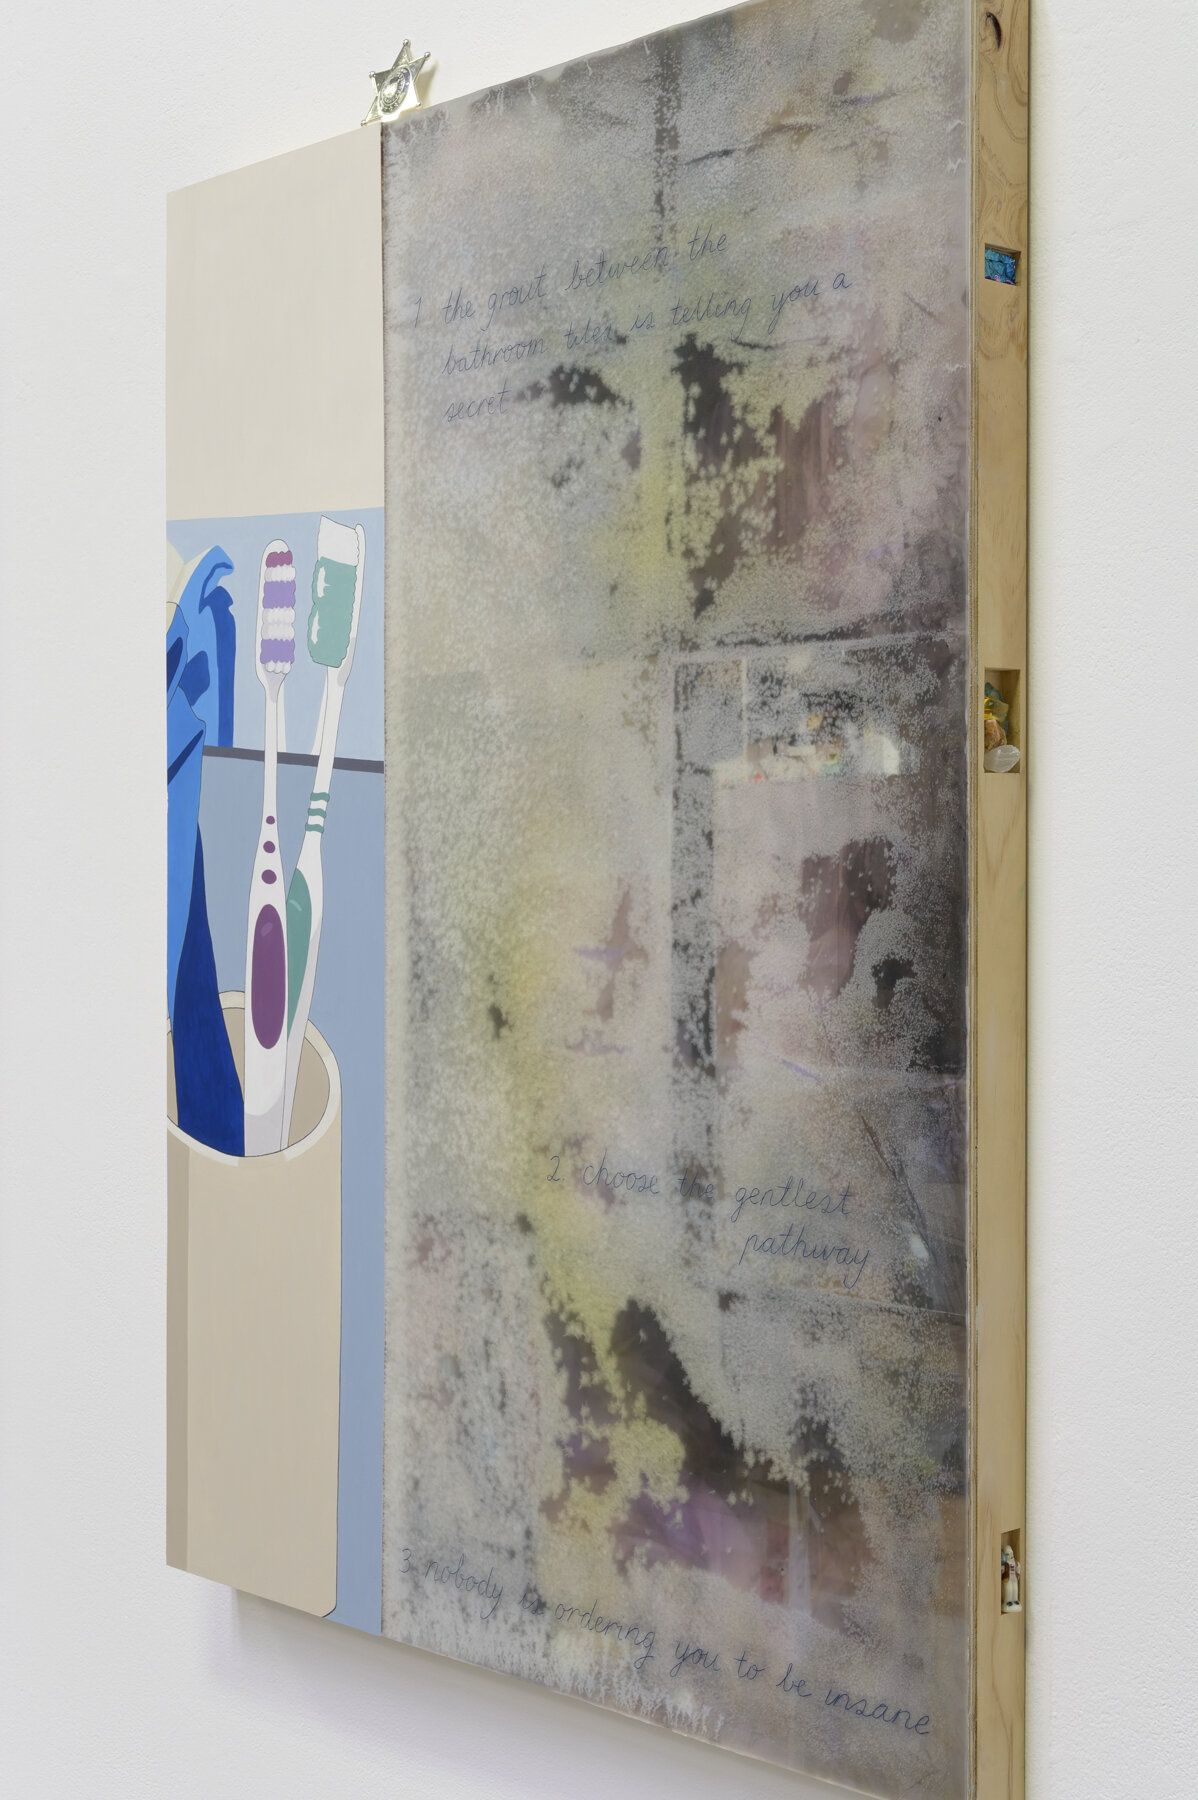   every morning, i rearrange our toothbrushes so we stay happy  (installation view)   2019. Oil paint, paraffin wax, paper, and found objects on plywood board. 104 x 79 x 5.6.  Image courtesy of Aaron Christopher Rees. 